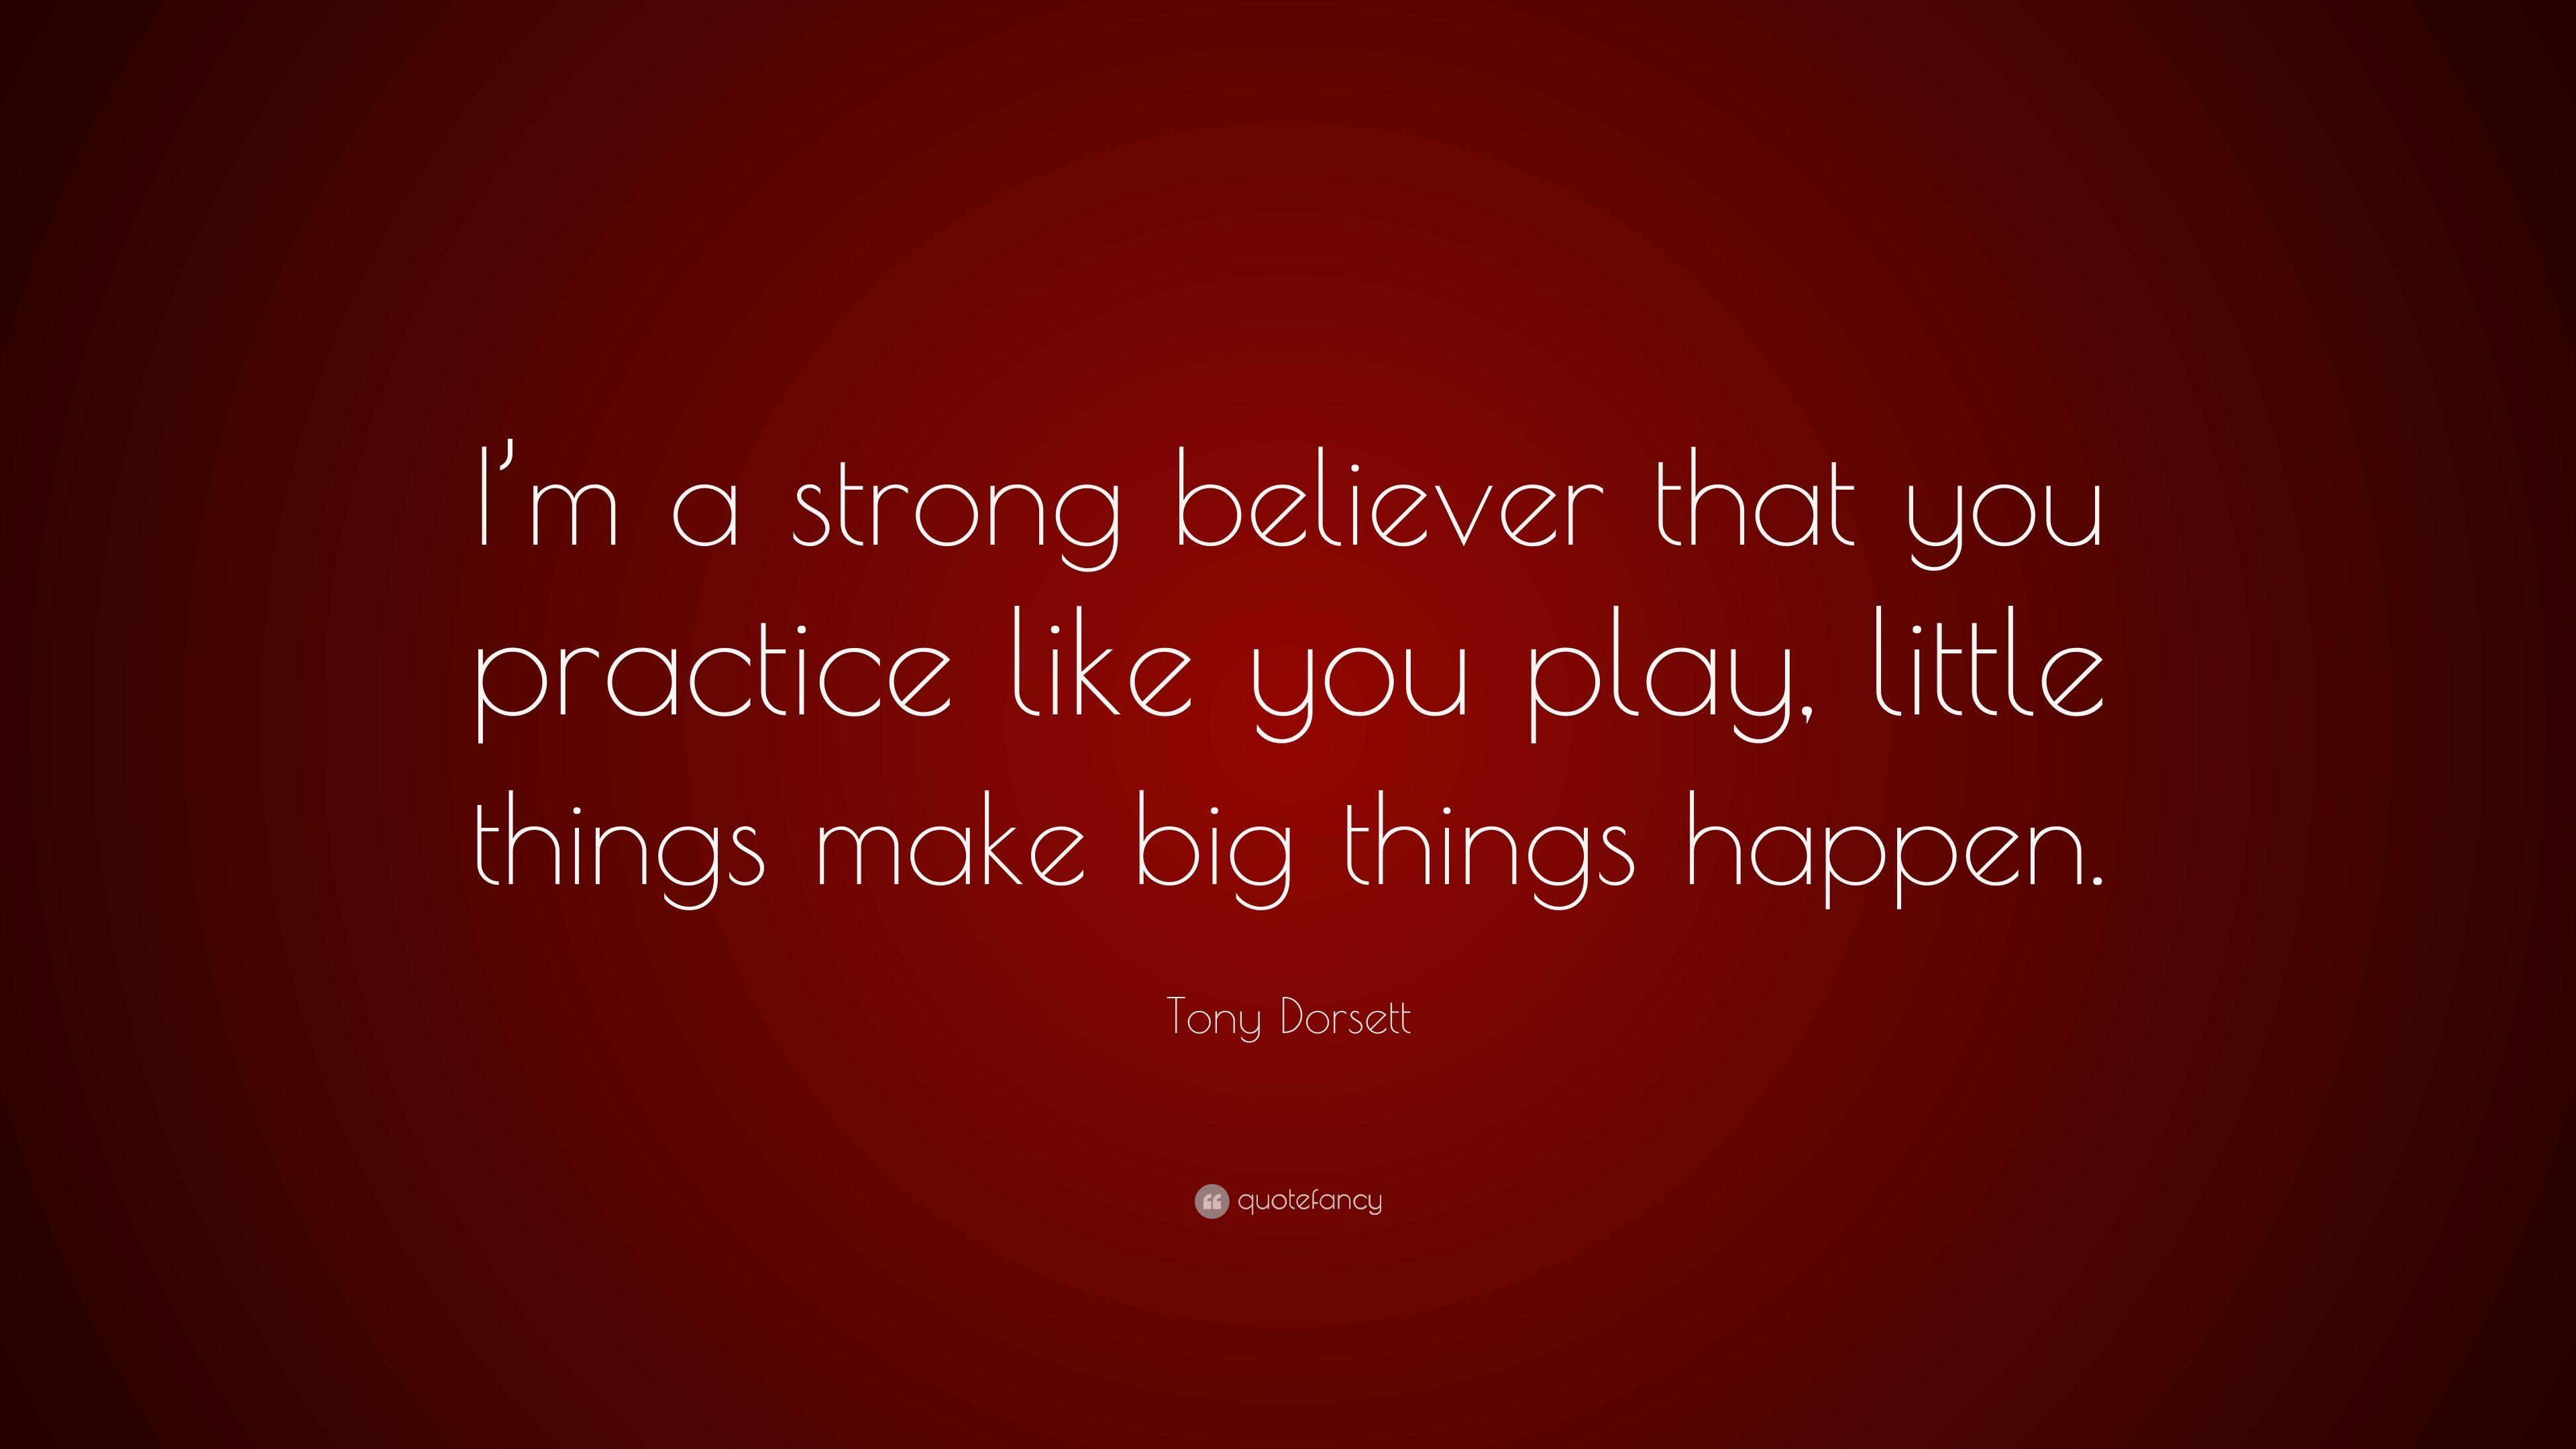 Tony Dorsett Quote: “I'm a strong believer that you practice like